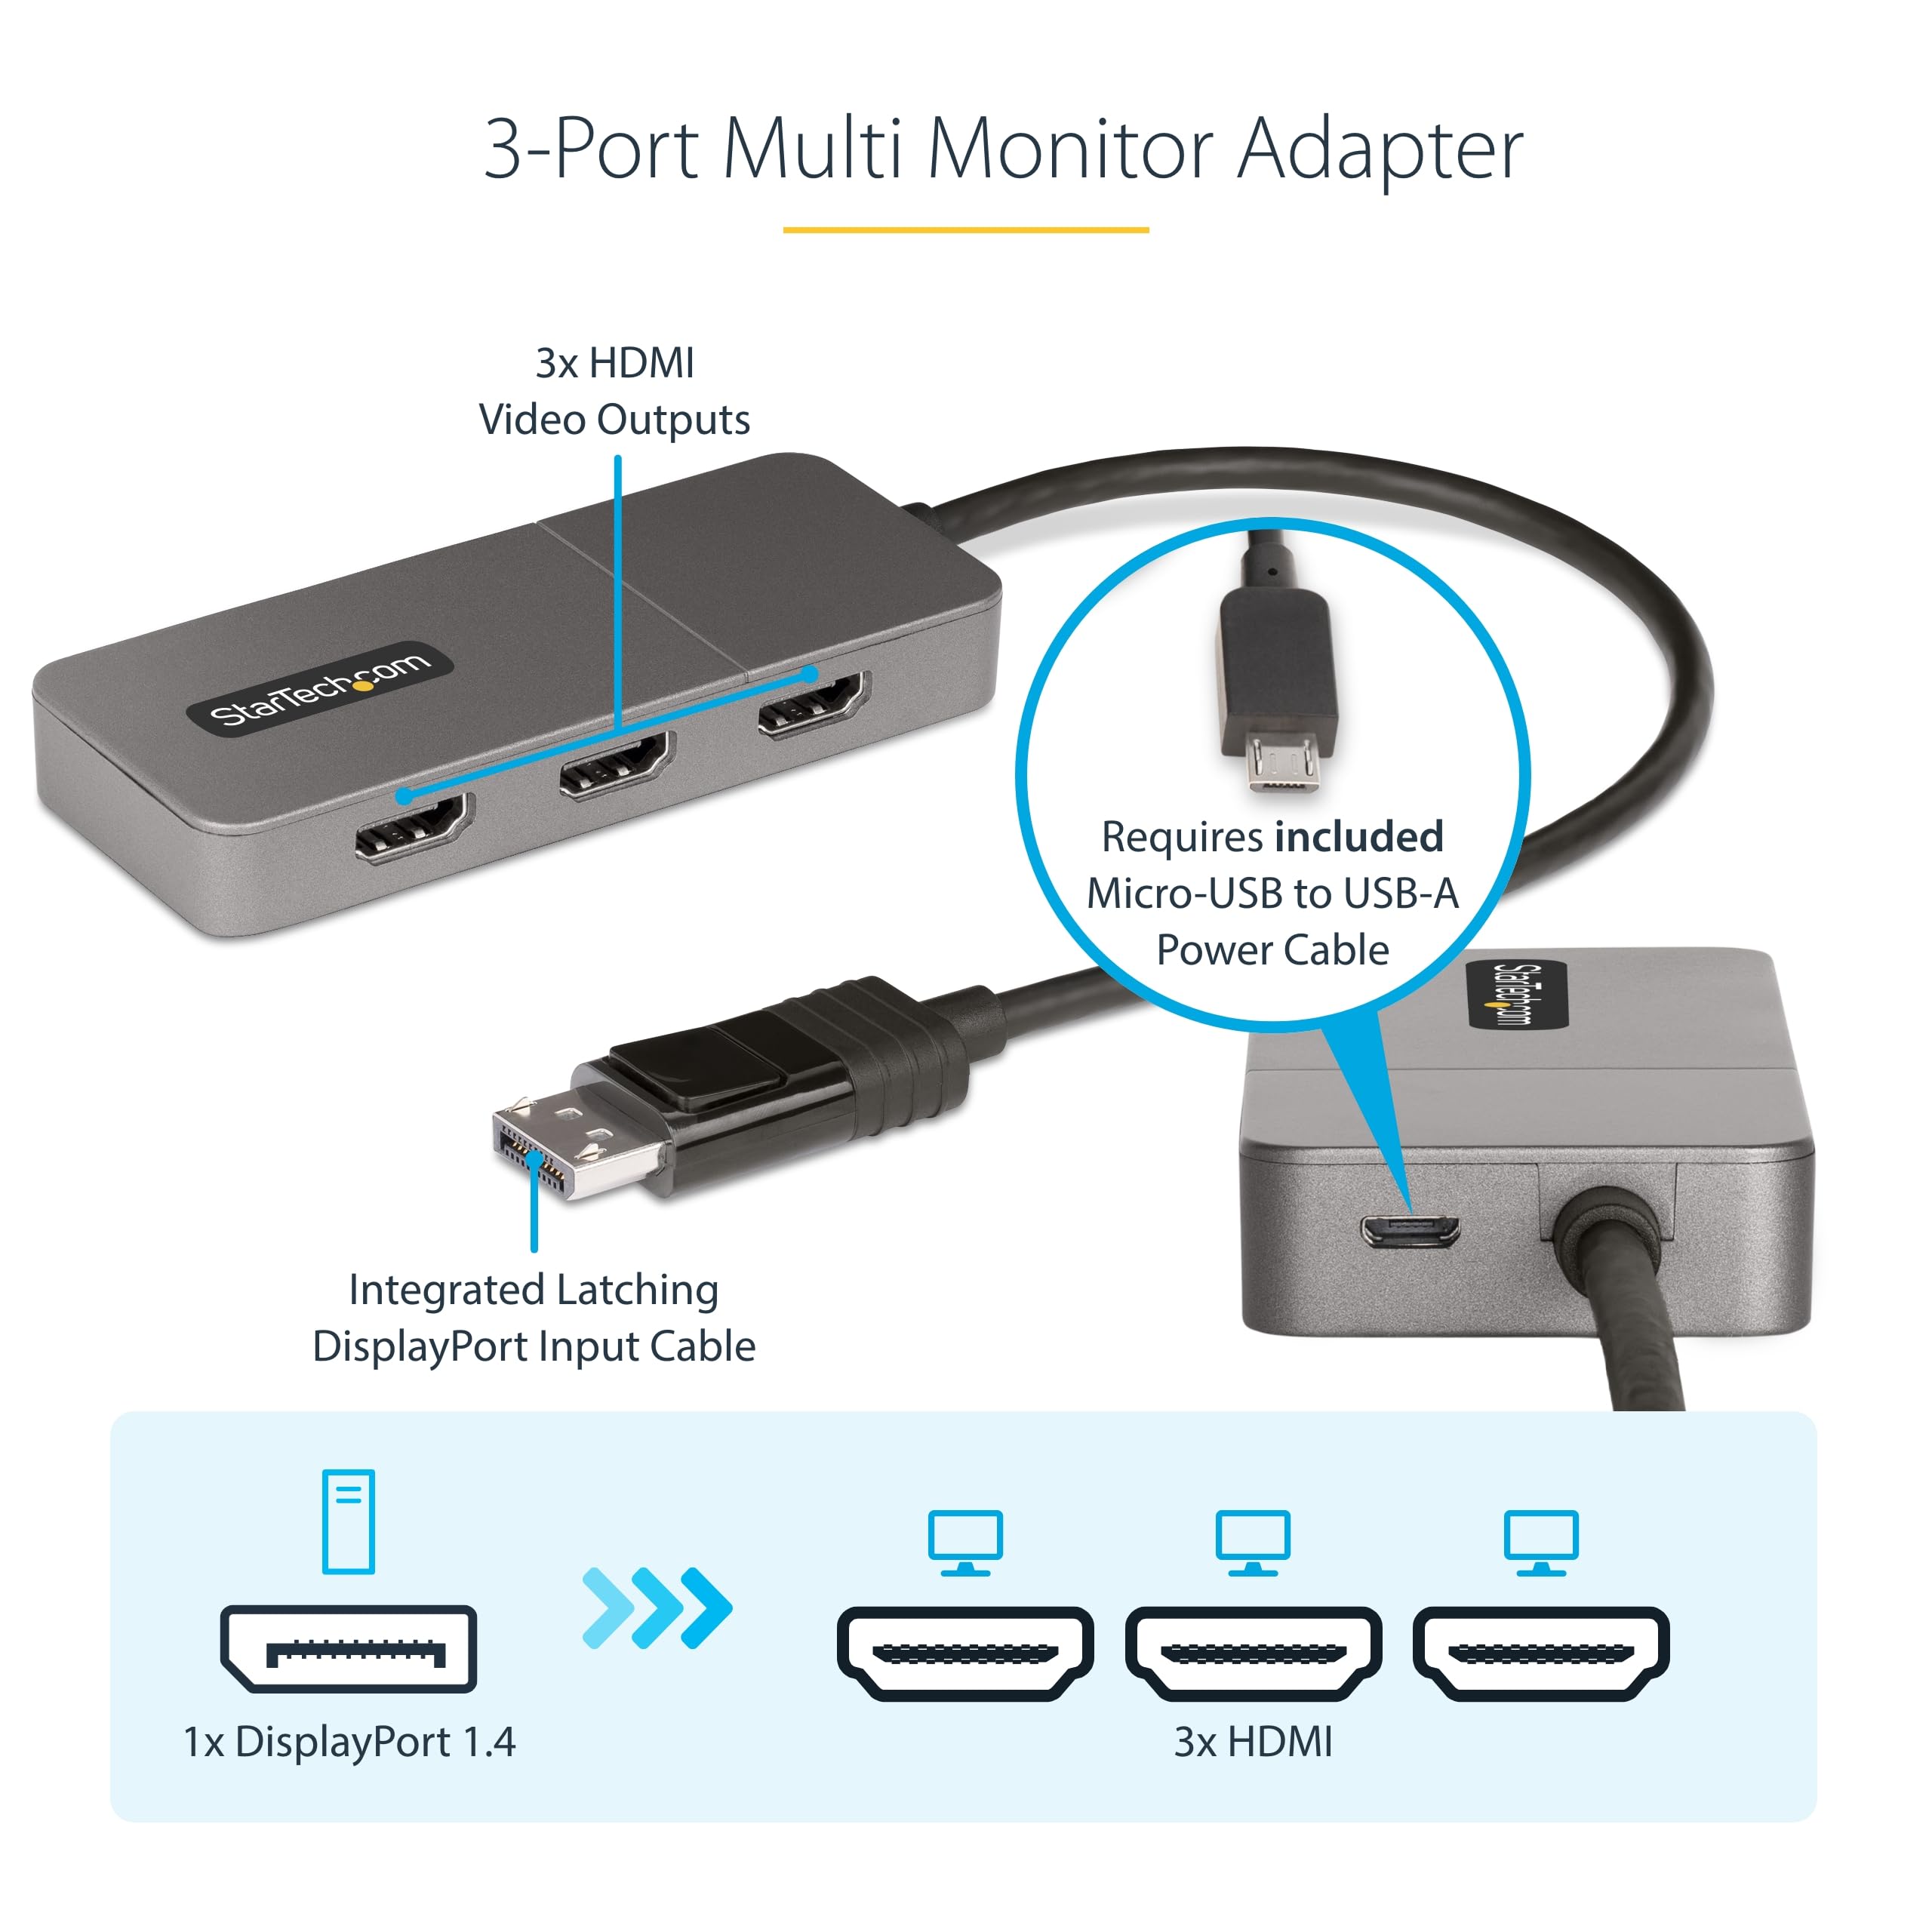 StarTech.com 3-Port MST Hub - DisplayPort to 3X HDMI, Triple 4K 60Hz Monitors, DP 1.4 Multi-Monitor Video Adapter, 1ft (30cm) Built-in Cable, USB Powered, Windows Only (MST14DP123HD)